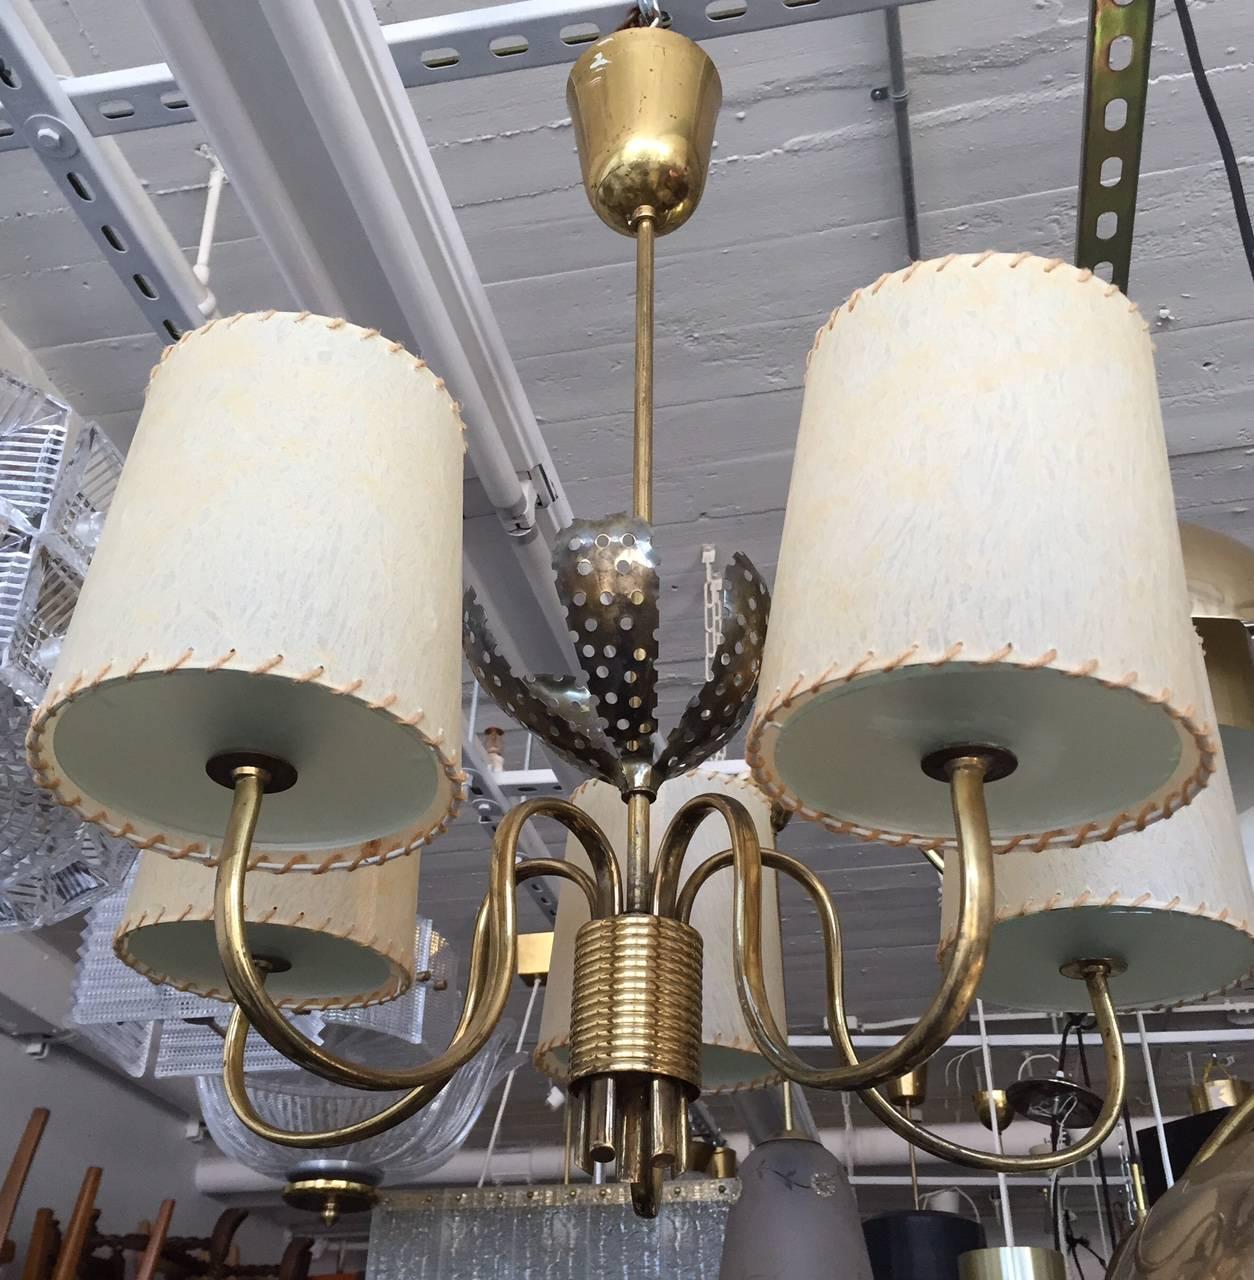 Five-light chandelier designed by Paavo Tynell for Taito, Finland, circa 1950.
Marked: Taito 9030.
The parchment shades and some glass is latest.
Existing wiring, we do not guaranty functionality, rewiring available upon request.
2 fixtures